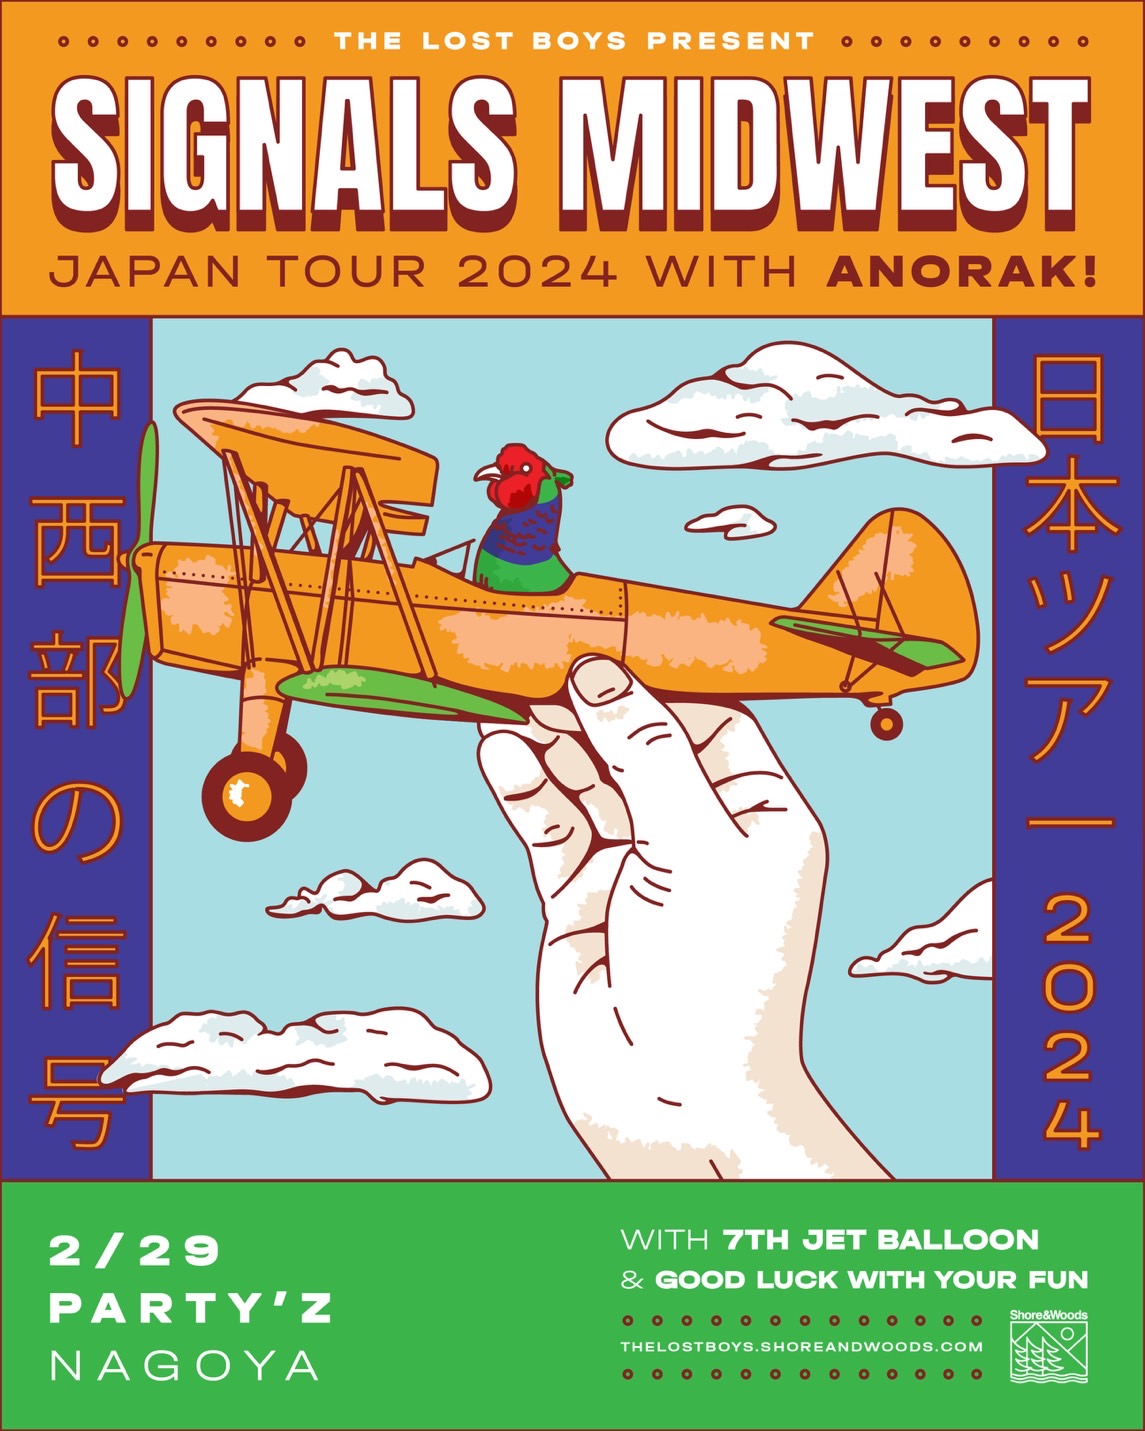 THE LOST BOYS PRESENTS SIGNALS MIDWEST JAPAN TOUR 2024